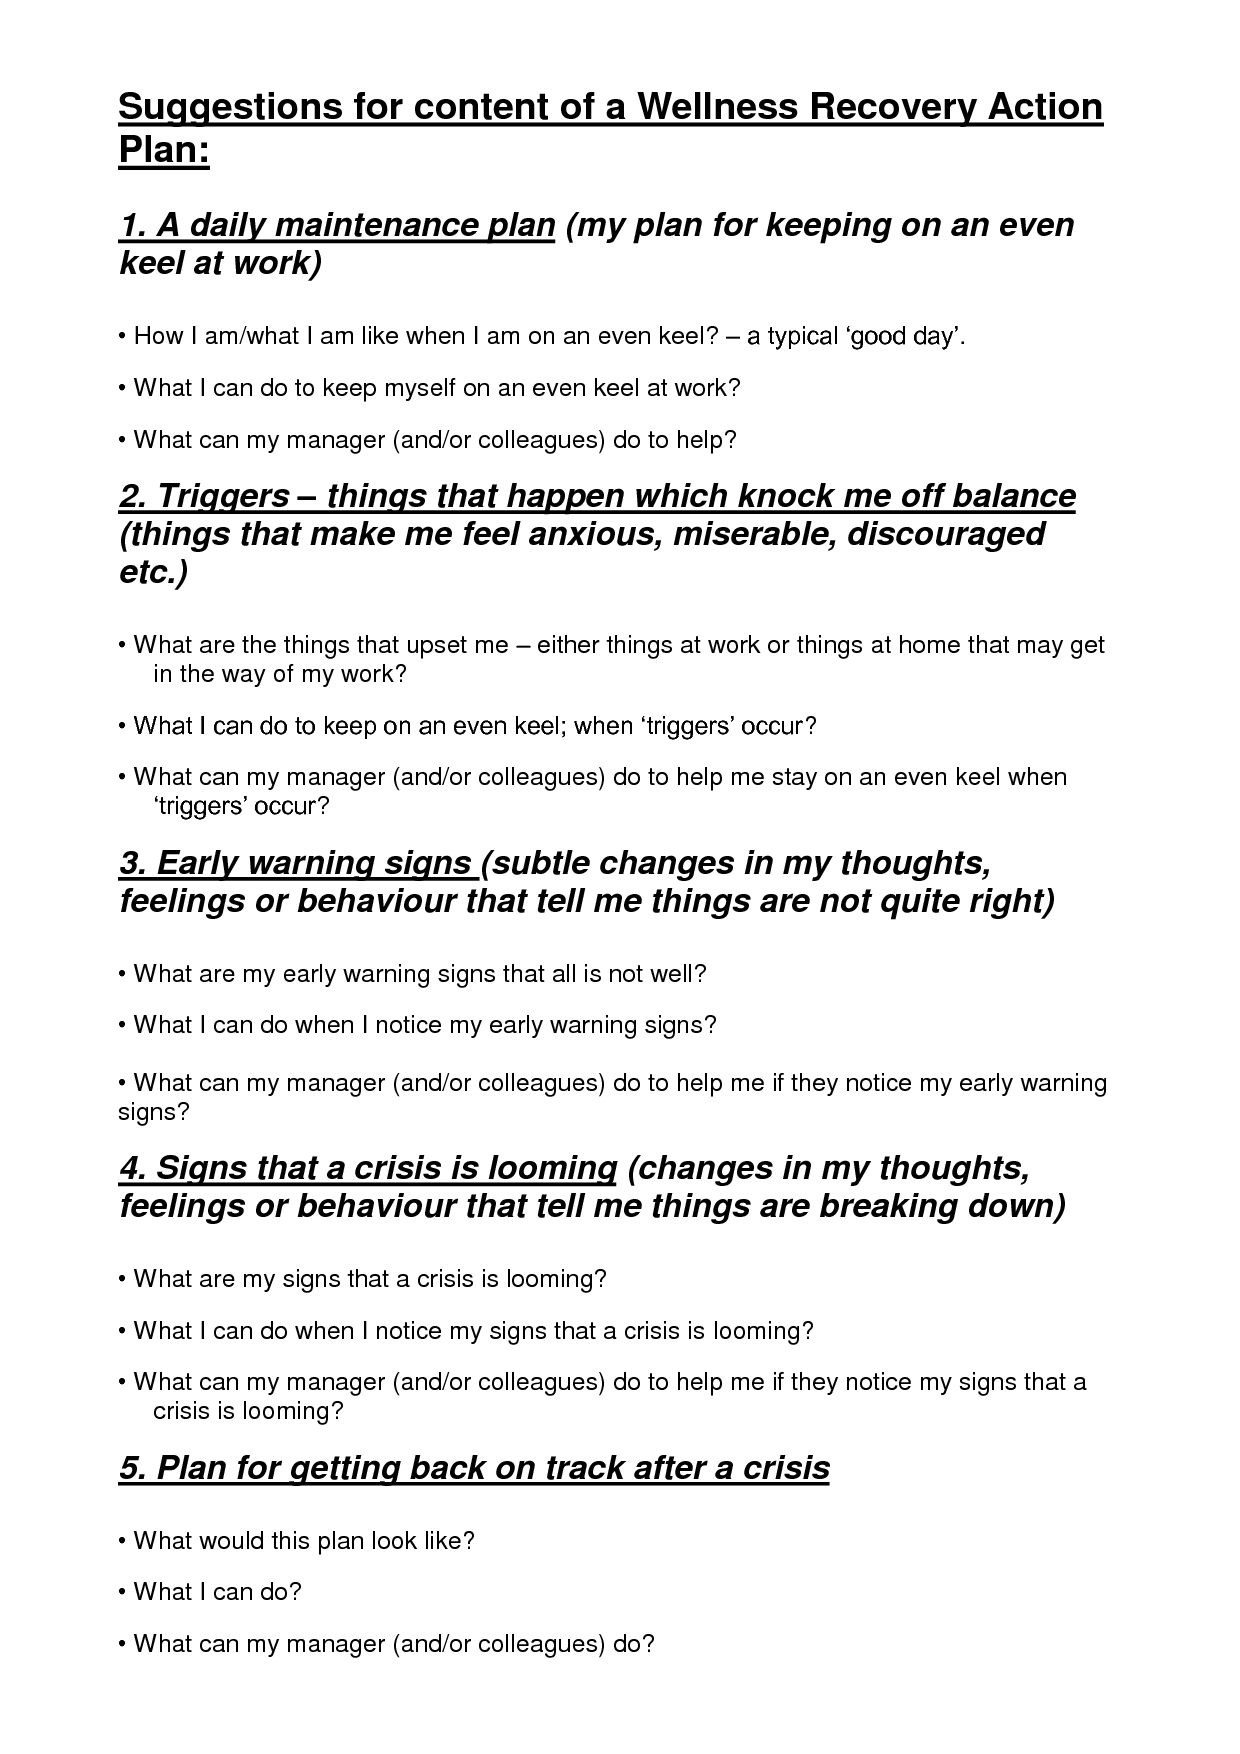 9-best-images-of-wellness-recovery-action-plan-worksheets-wrap-wellness-recovery-action-plan